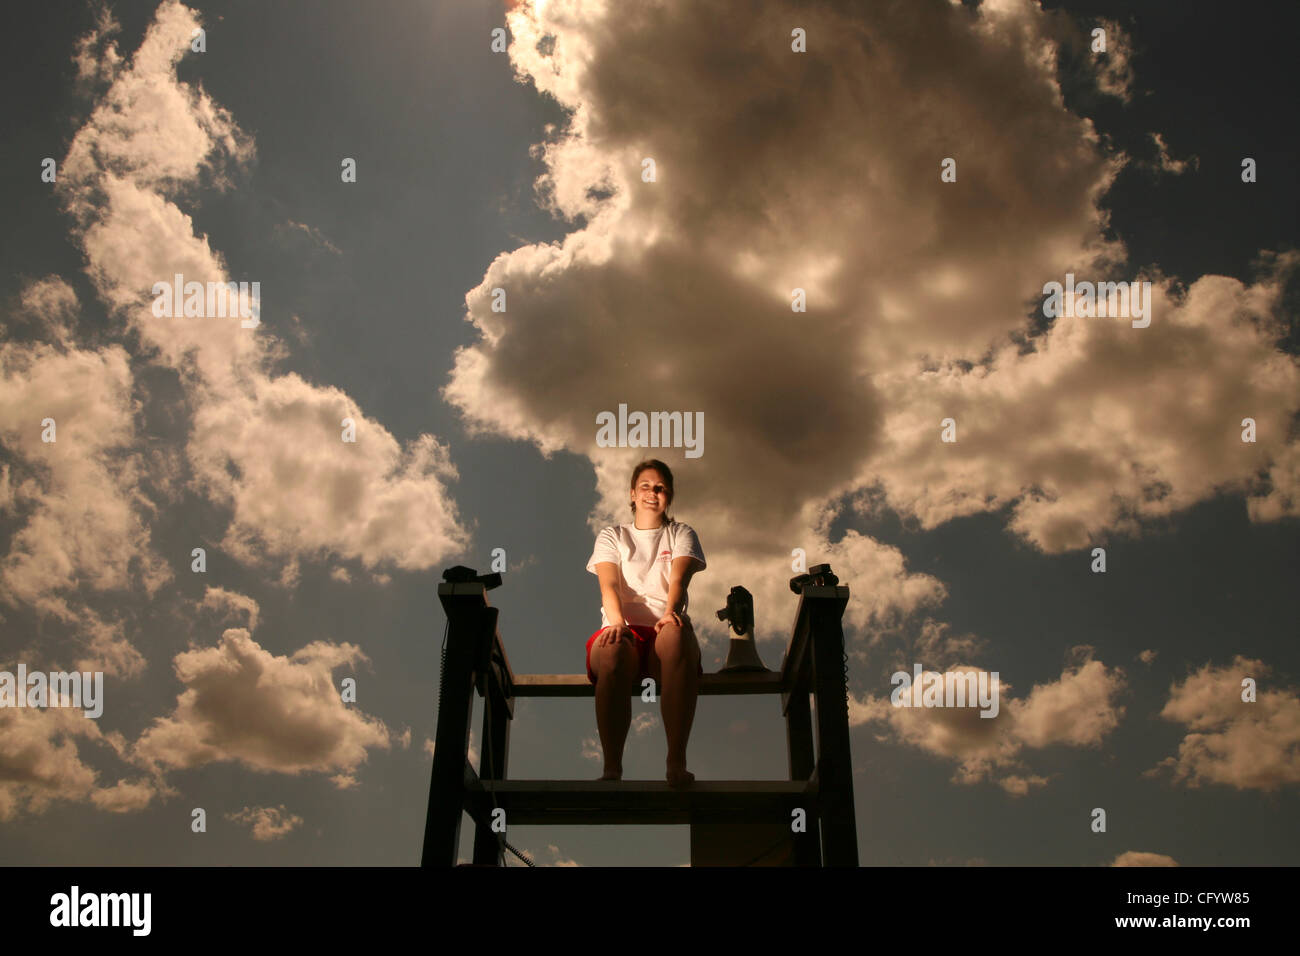 May 31, 2007 - Champlin, MN, USA - ELISSA DINGMANN has been a summer lifeguard for the past eight years. (Credit Image: © Jeff Wheeler/Minneapolis Star Tribune/ZUMA Press) RESTRICTIONS: USA Tabloid RIGHTS OUT! Stock Photo